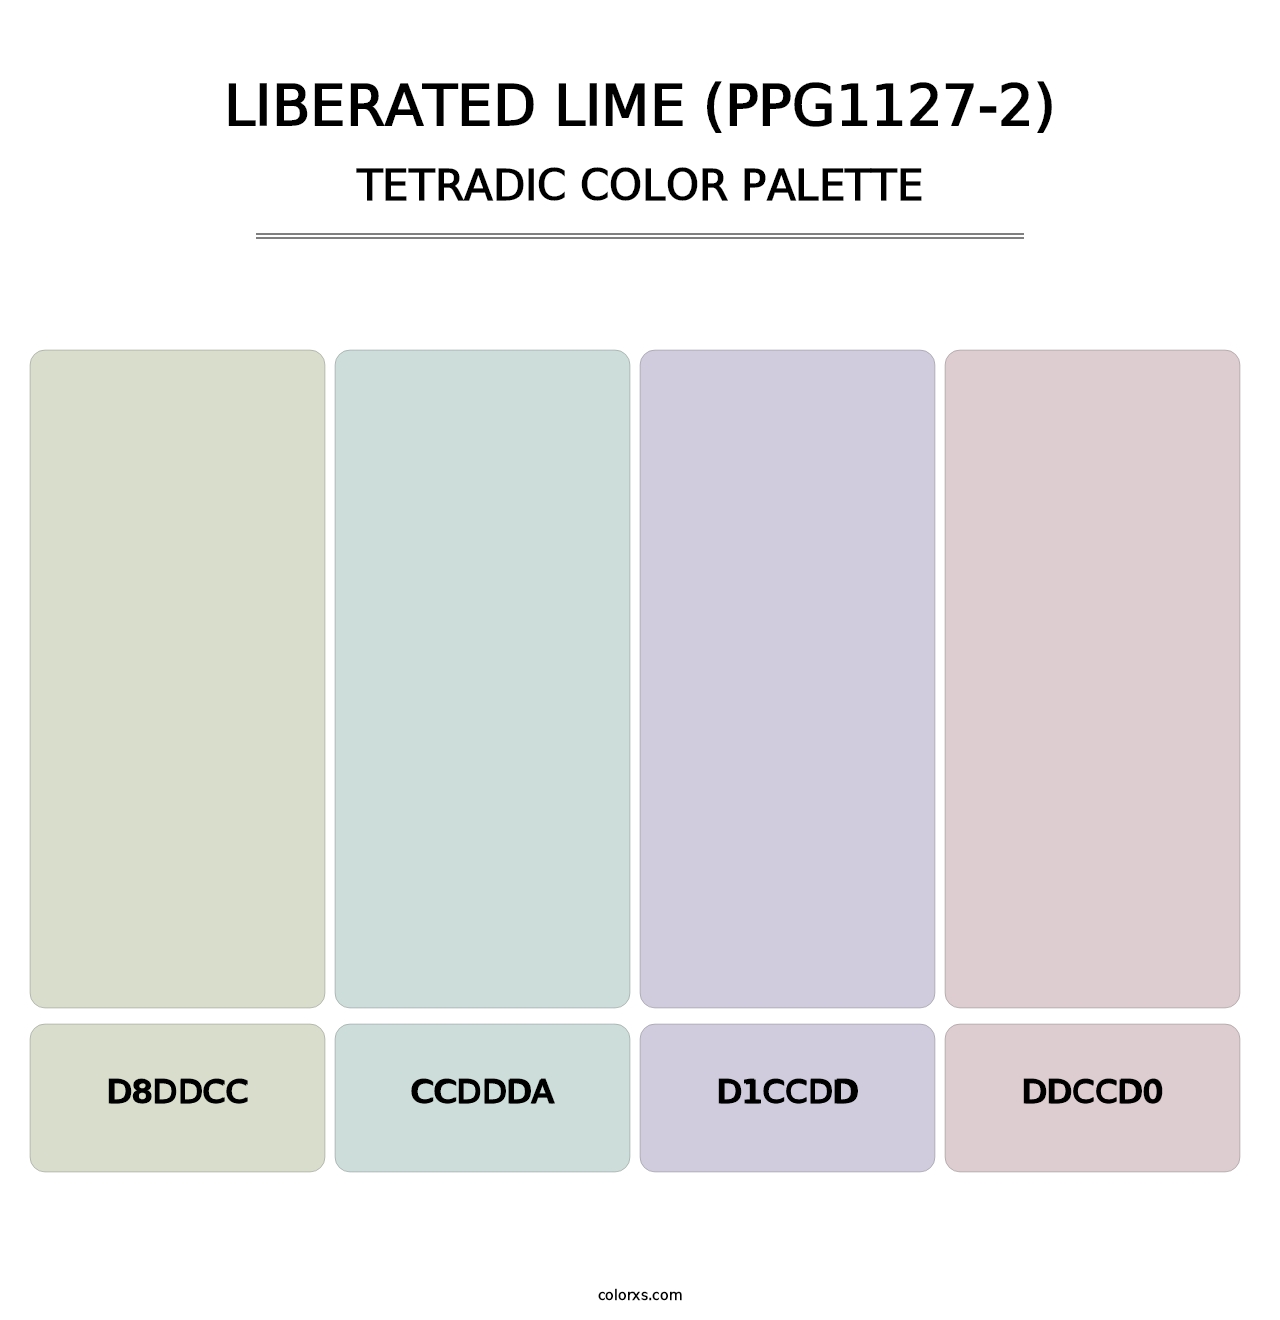 Liberated Lime (PPG1127-2) - Tetradic Color Palette